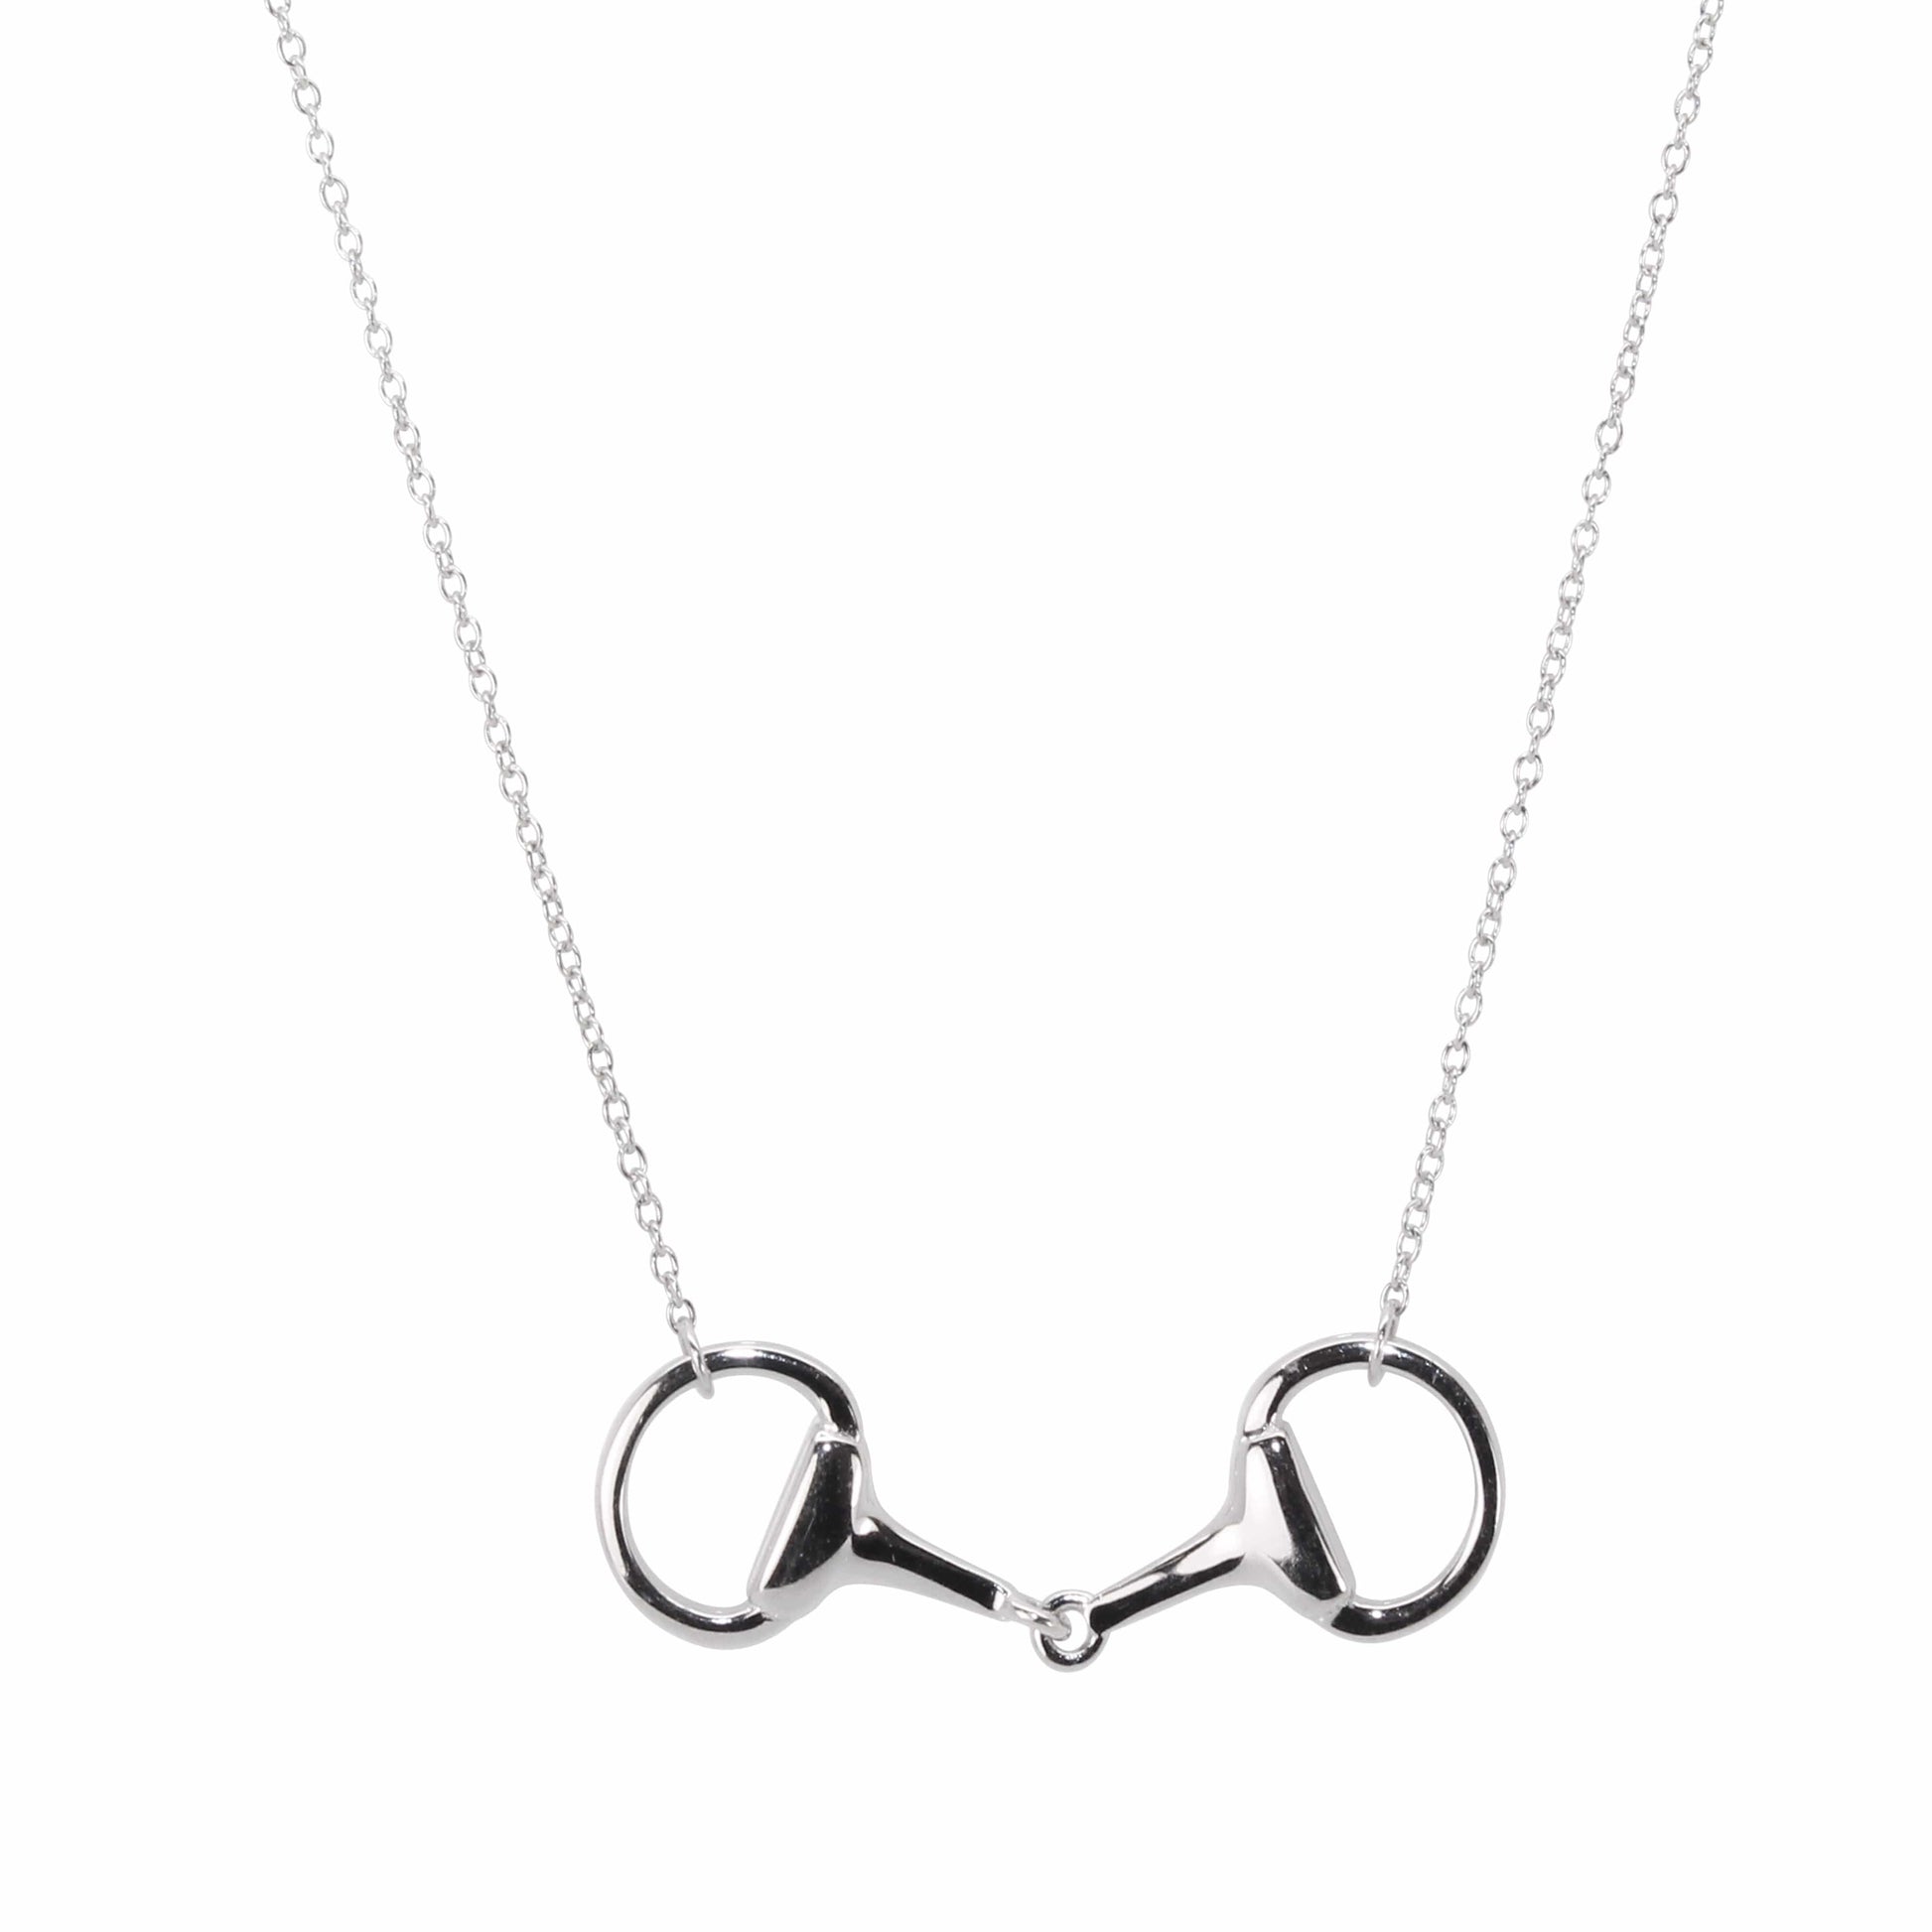 PEGASUS JEWELLERY Necklaces Sterling Silver Snaffle Equestrian Necklace